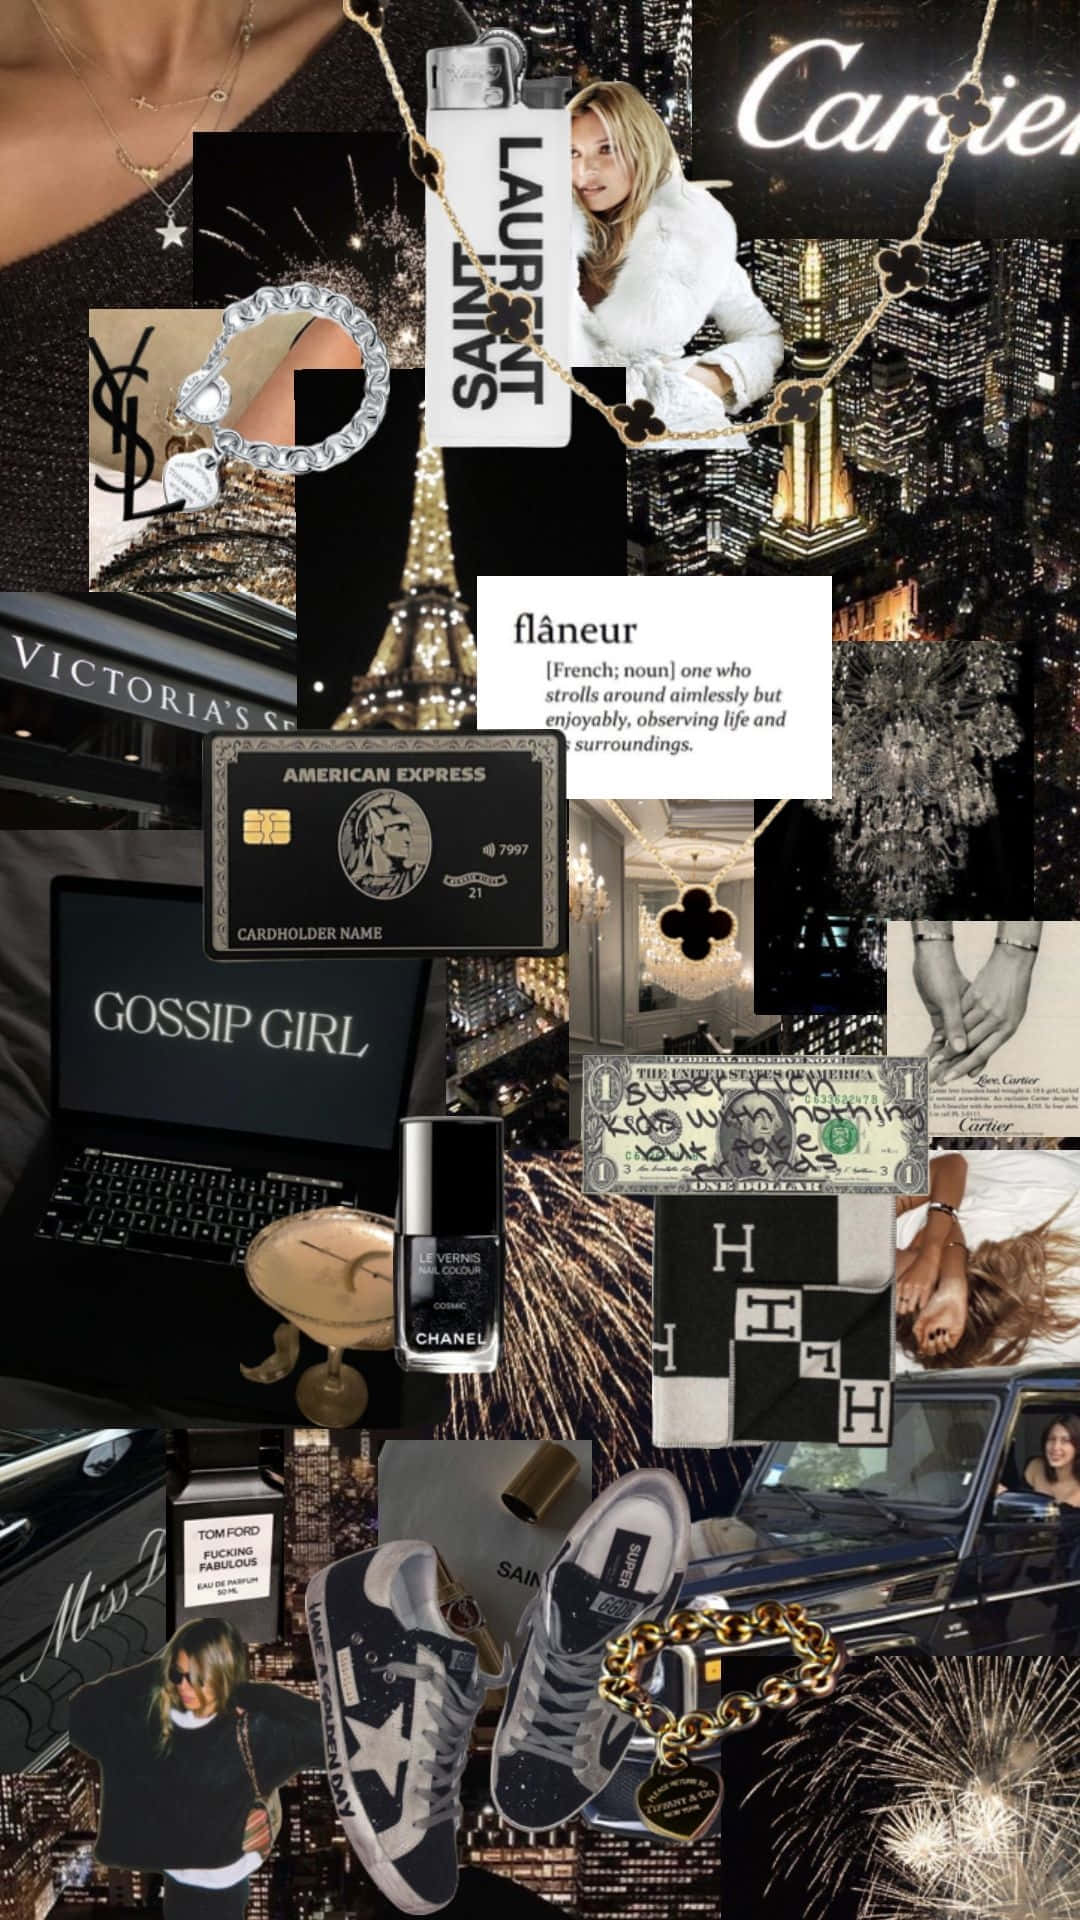 Rich Girl Lifestyle Collage Wallpaper